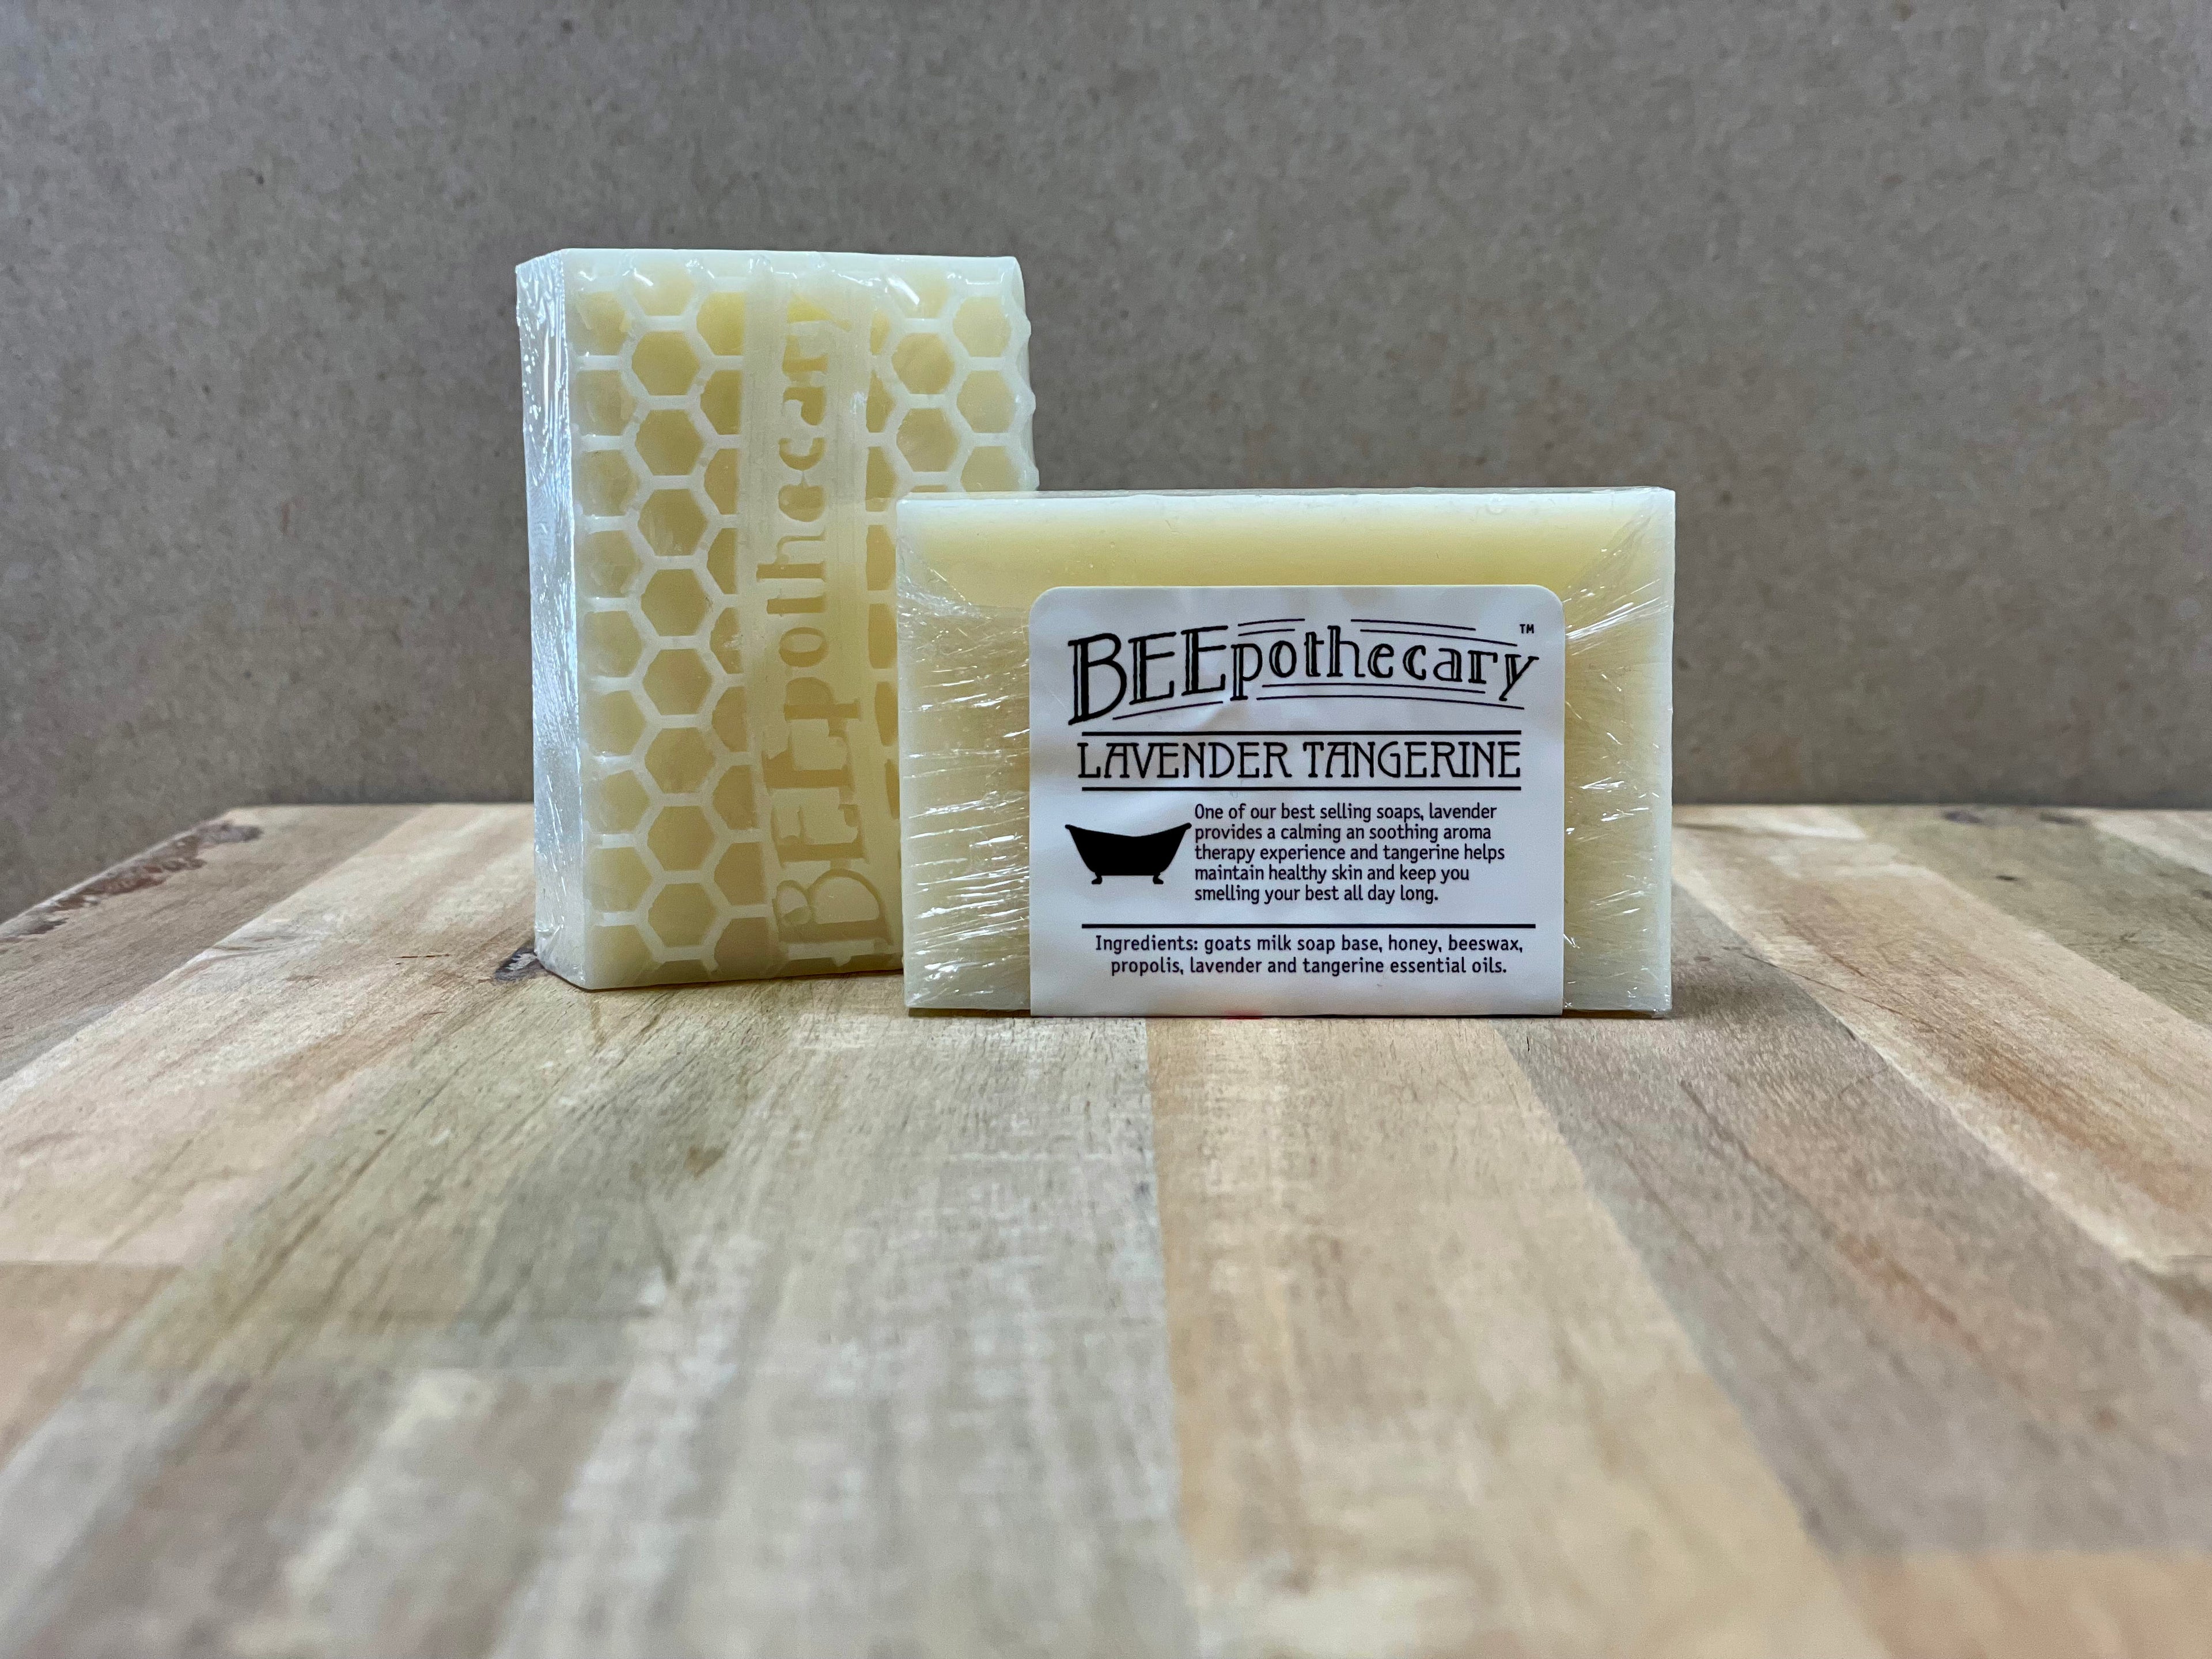 BEEpothecary Goat Milk Soap Lavender Tangerine fragrance in packaging with white label